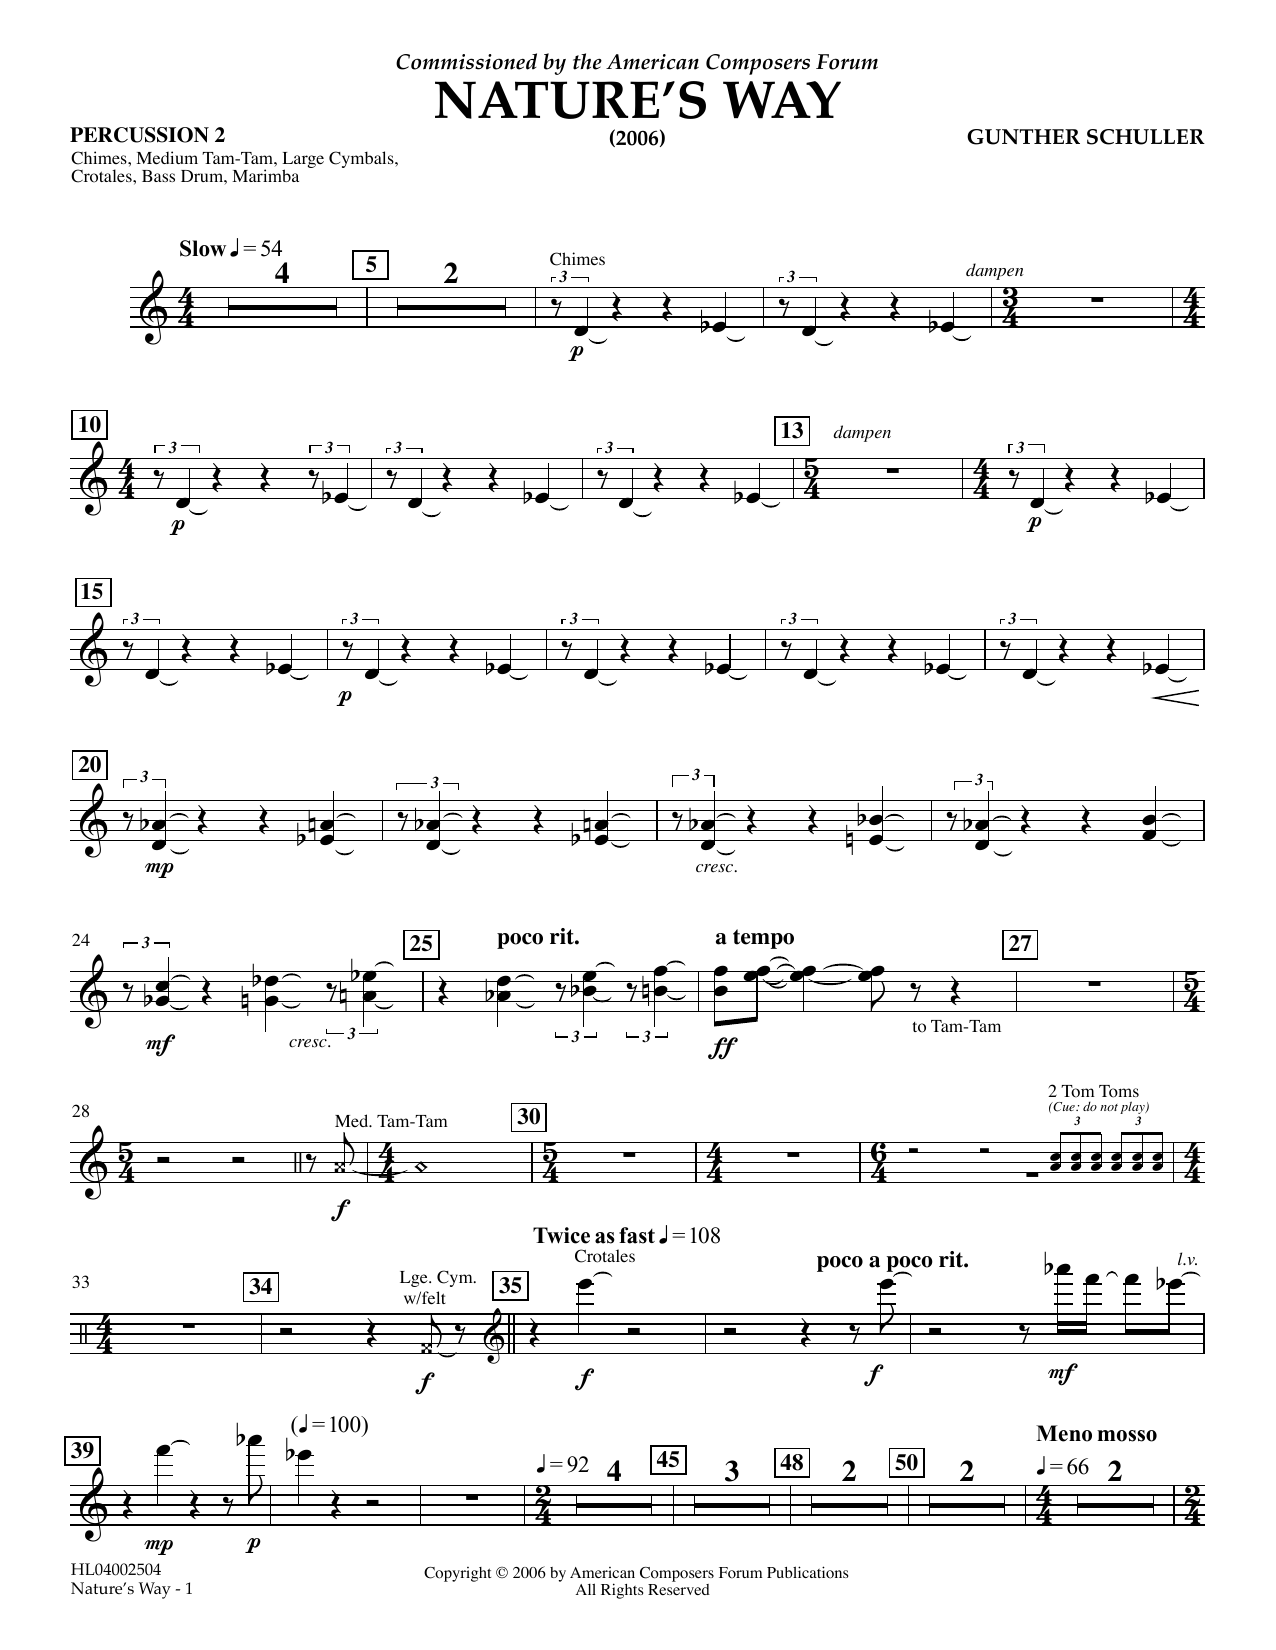 Download Gunther Schuller Nature's Way - Percussion 2 Sheet Music